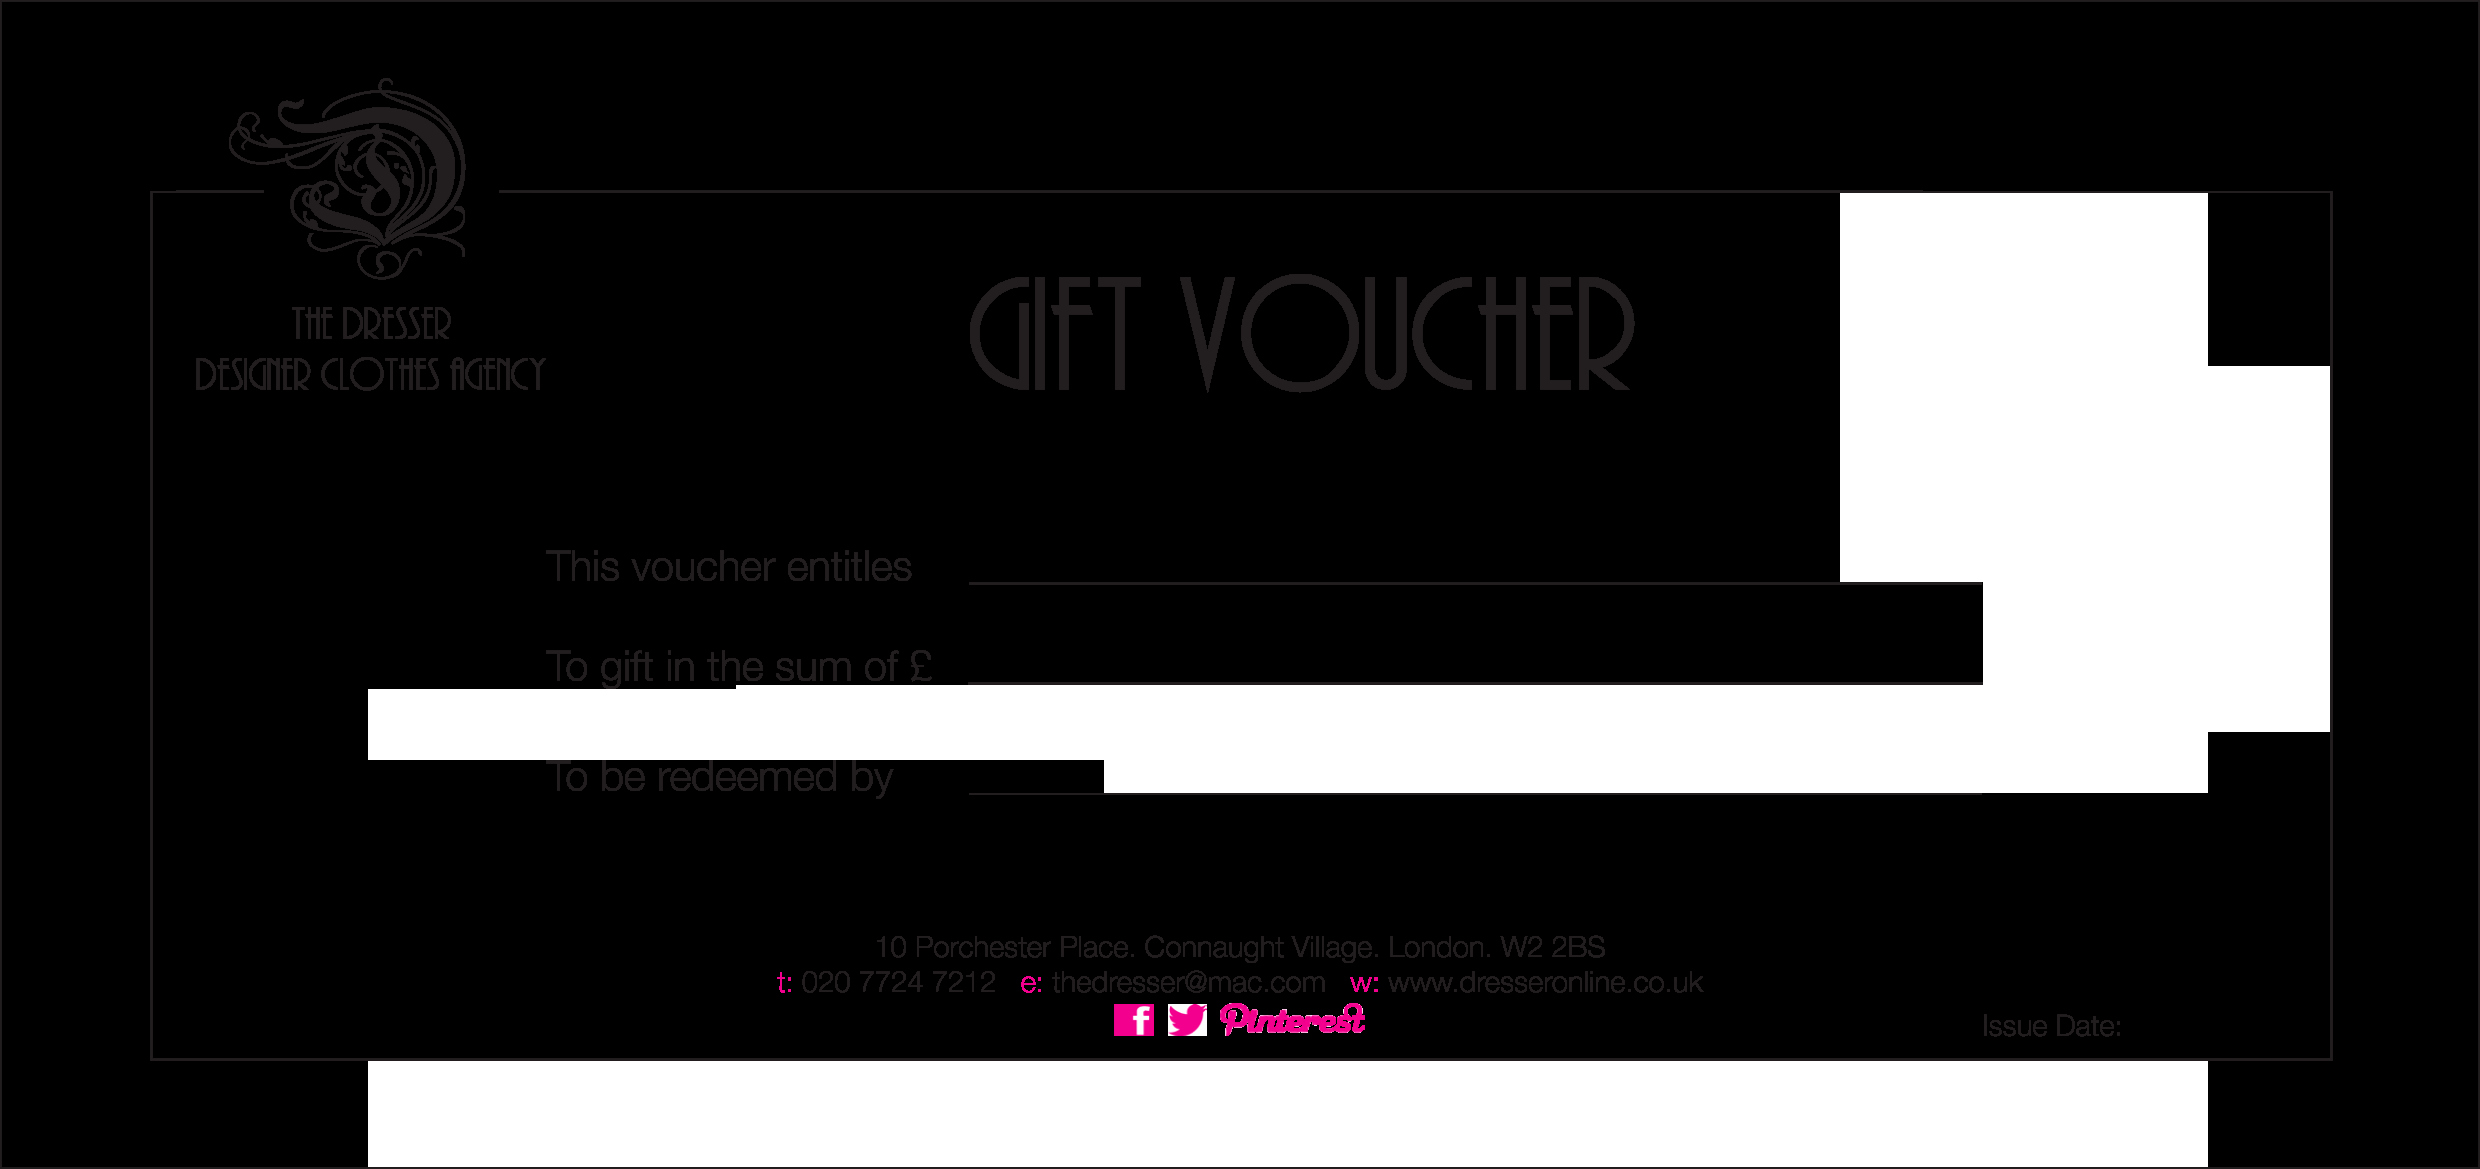 Free Gift Card Template Word Beautiful Gift Voucher Template Word Free Download